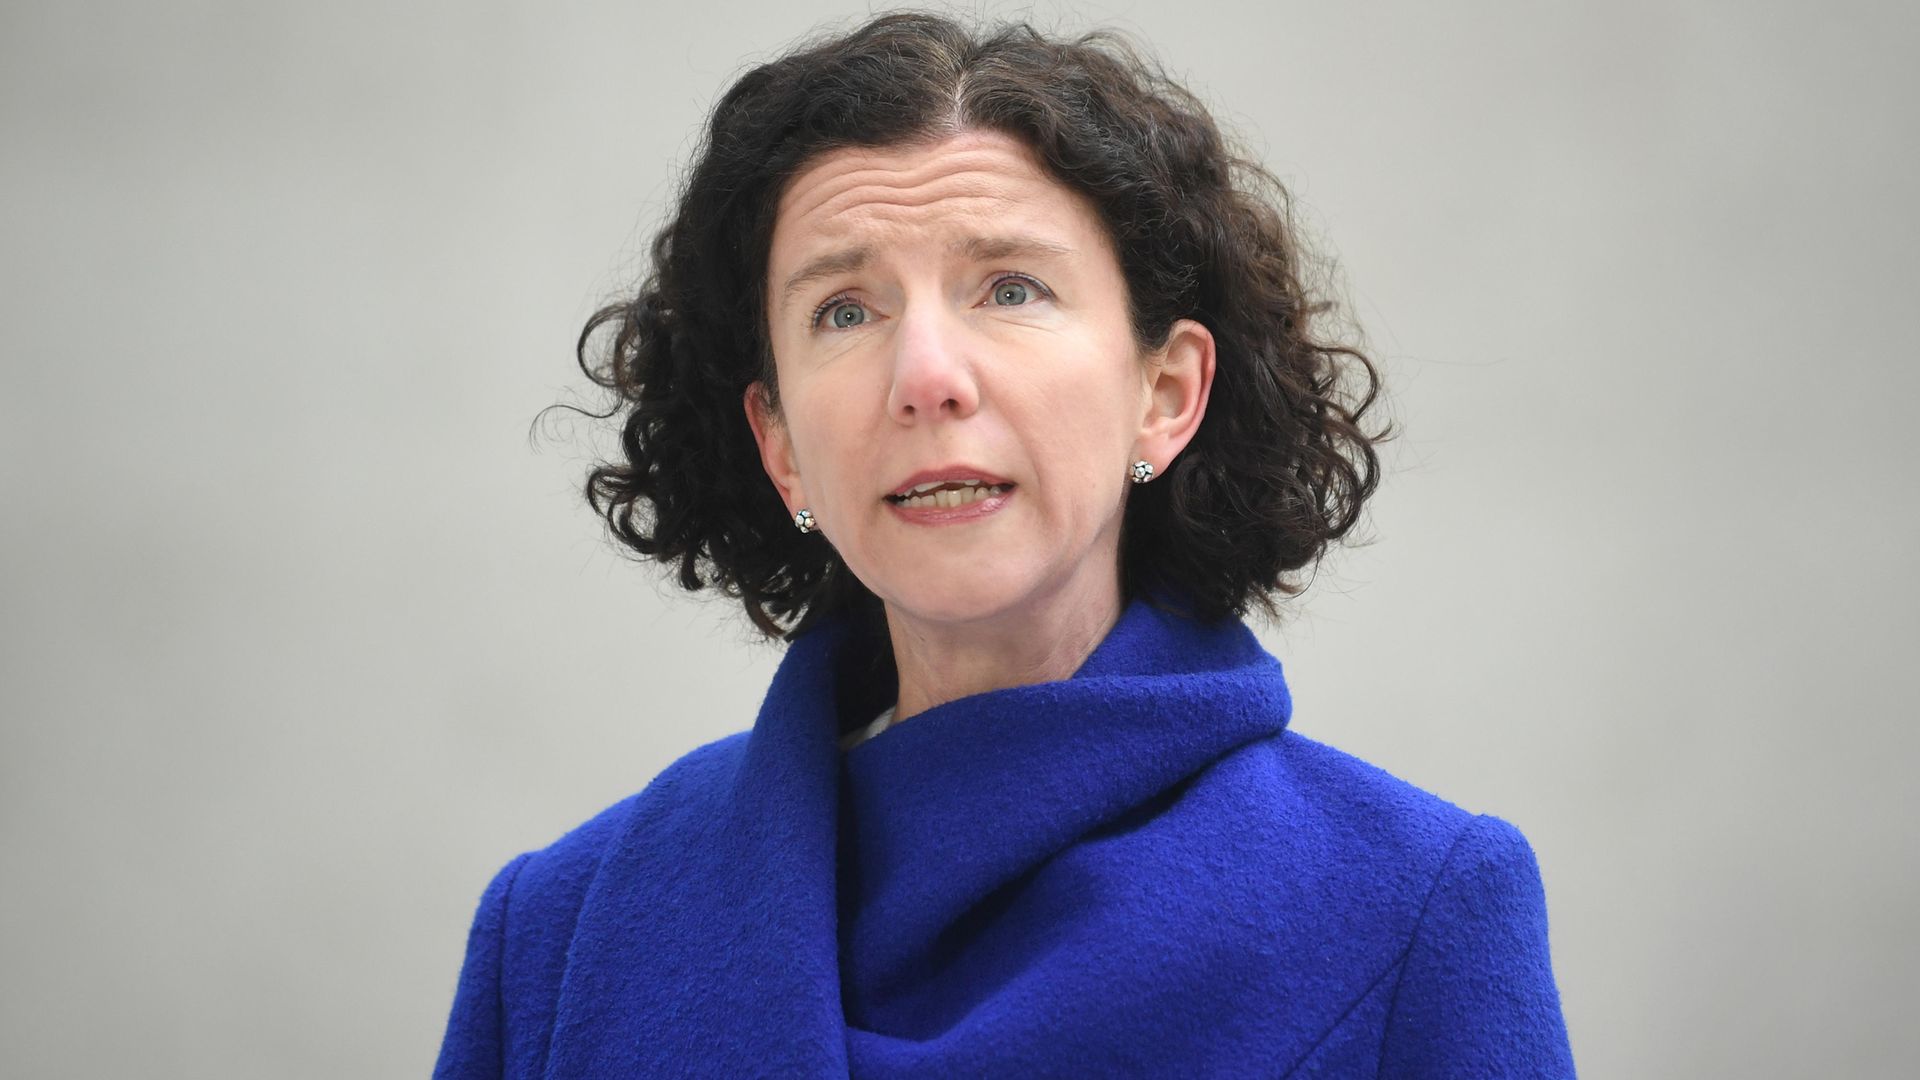 Shadow chancellor Anneliese Dodds arriving at BBC Broadcasting House in central London - Credit: PA